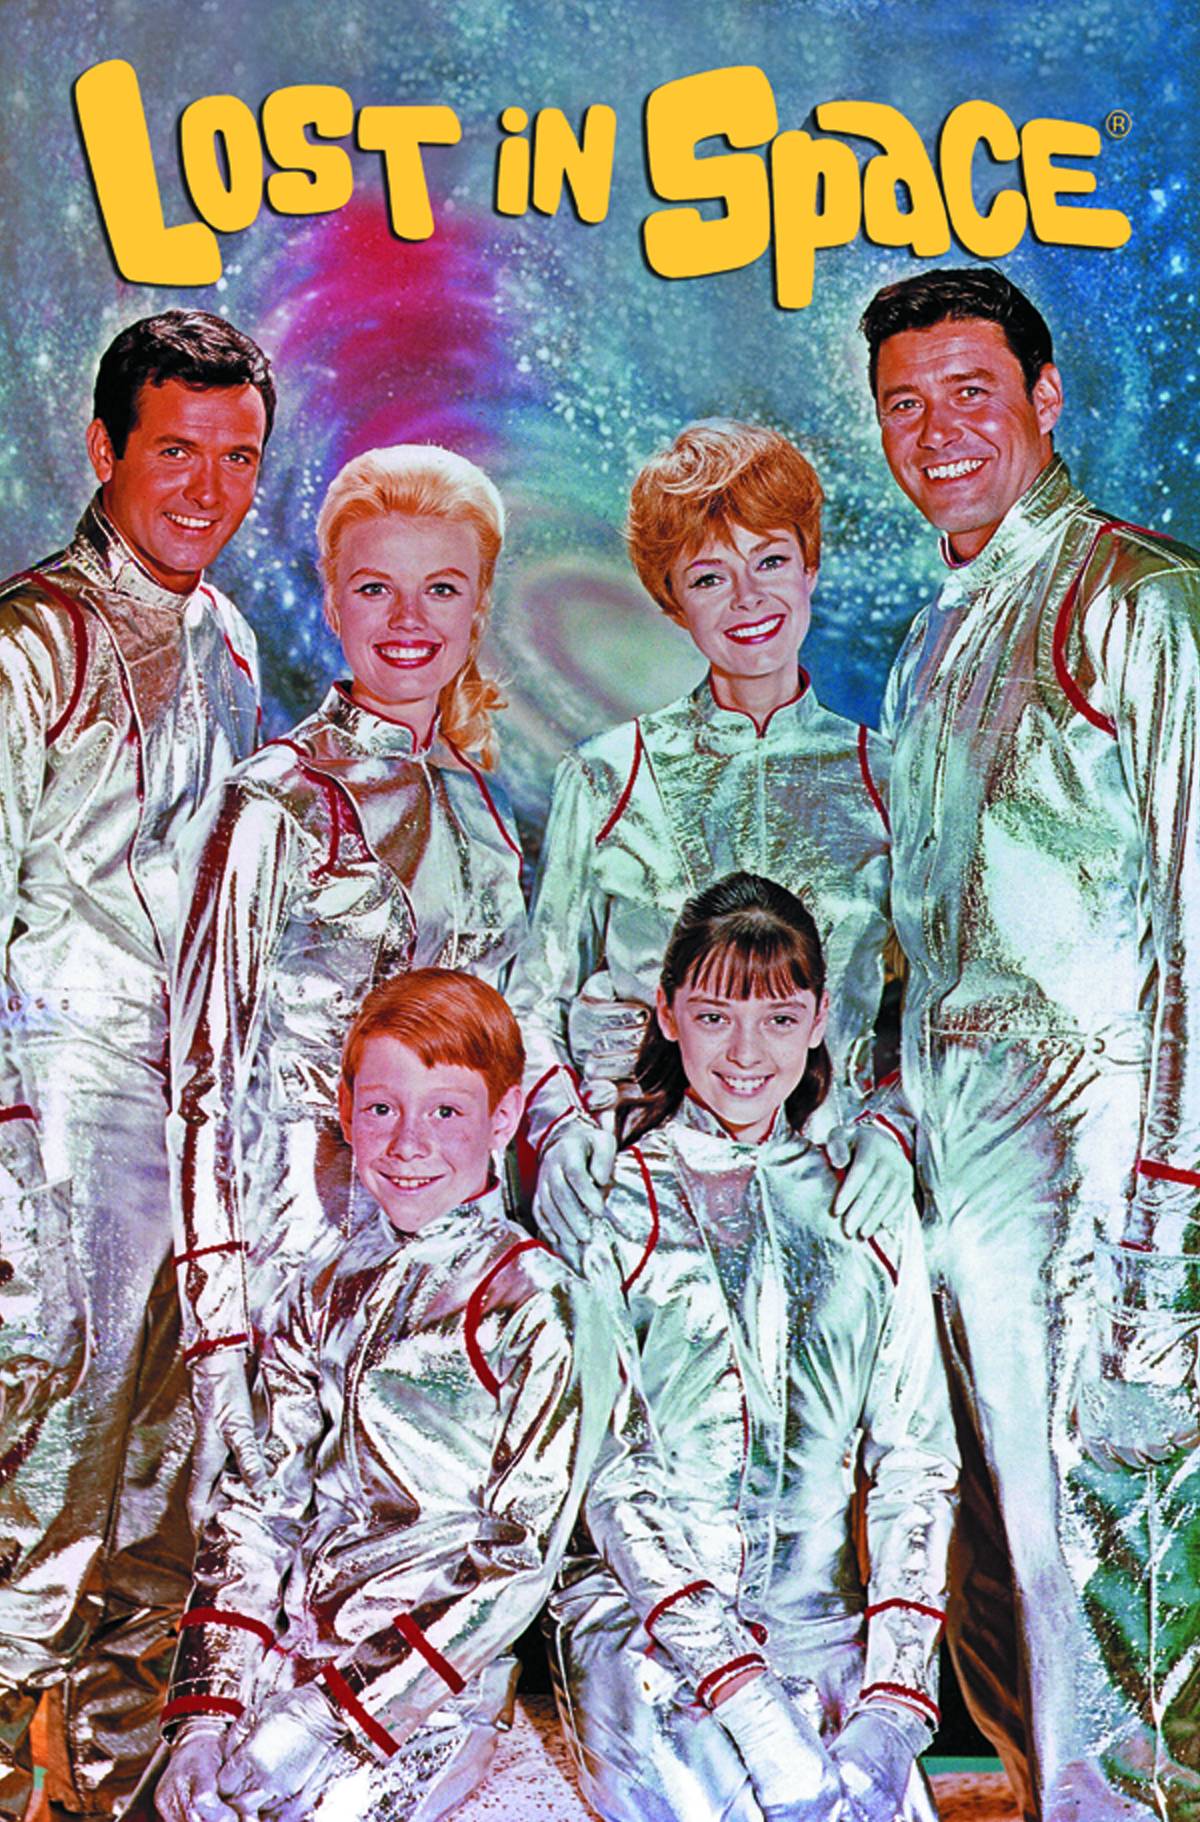 Lost in Space #1 Cover B Photo